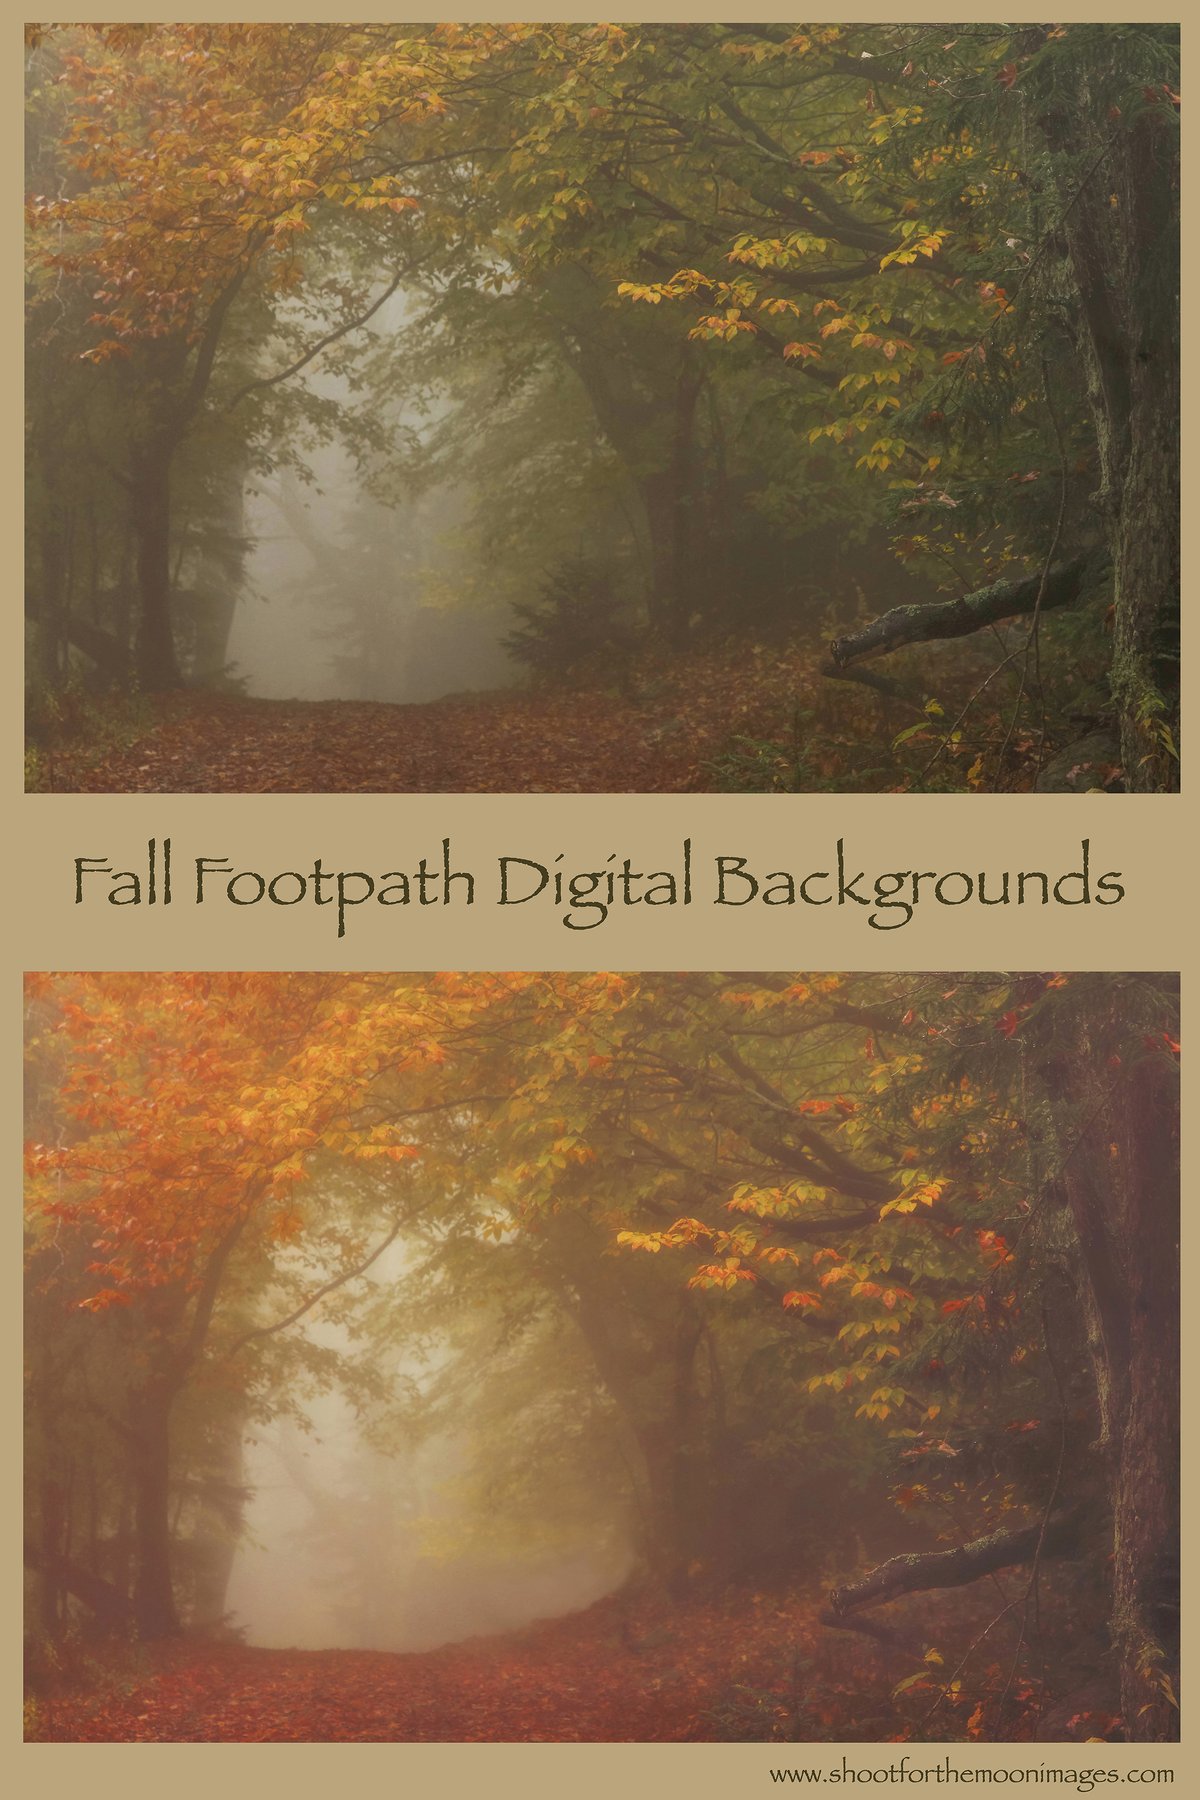 Image of Fall Footpath Digital Backgrounds